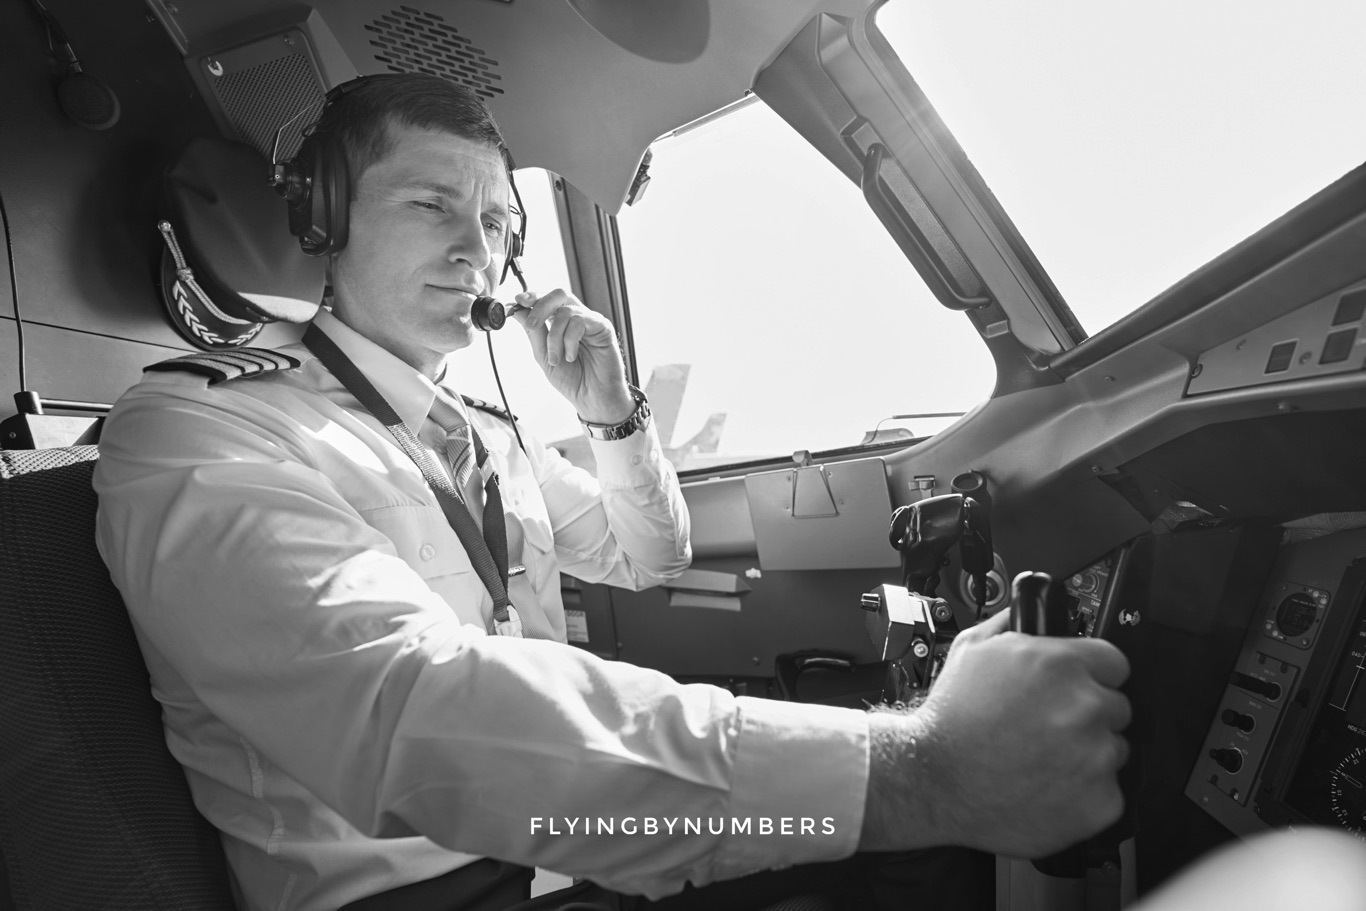 Pilot speaking English in commercial aircraft cockpit